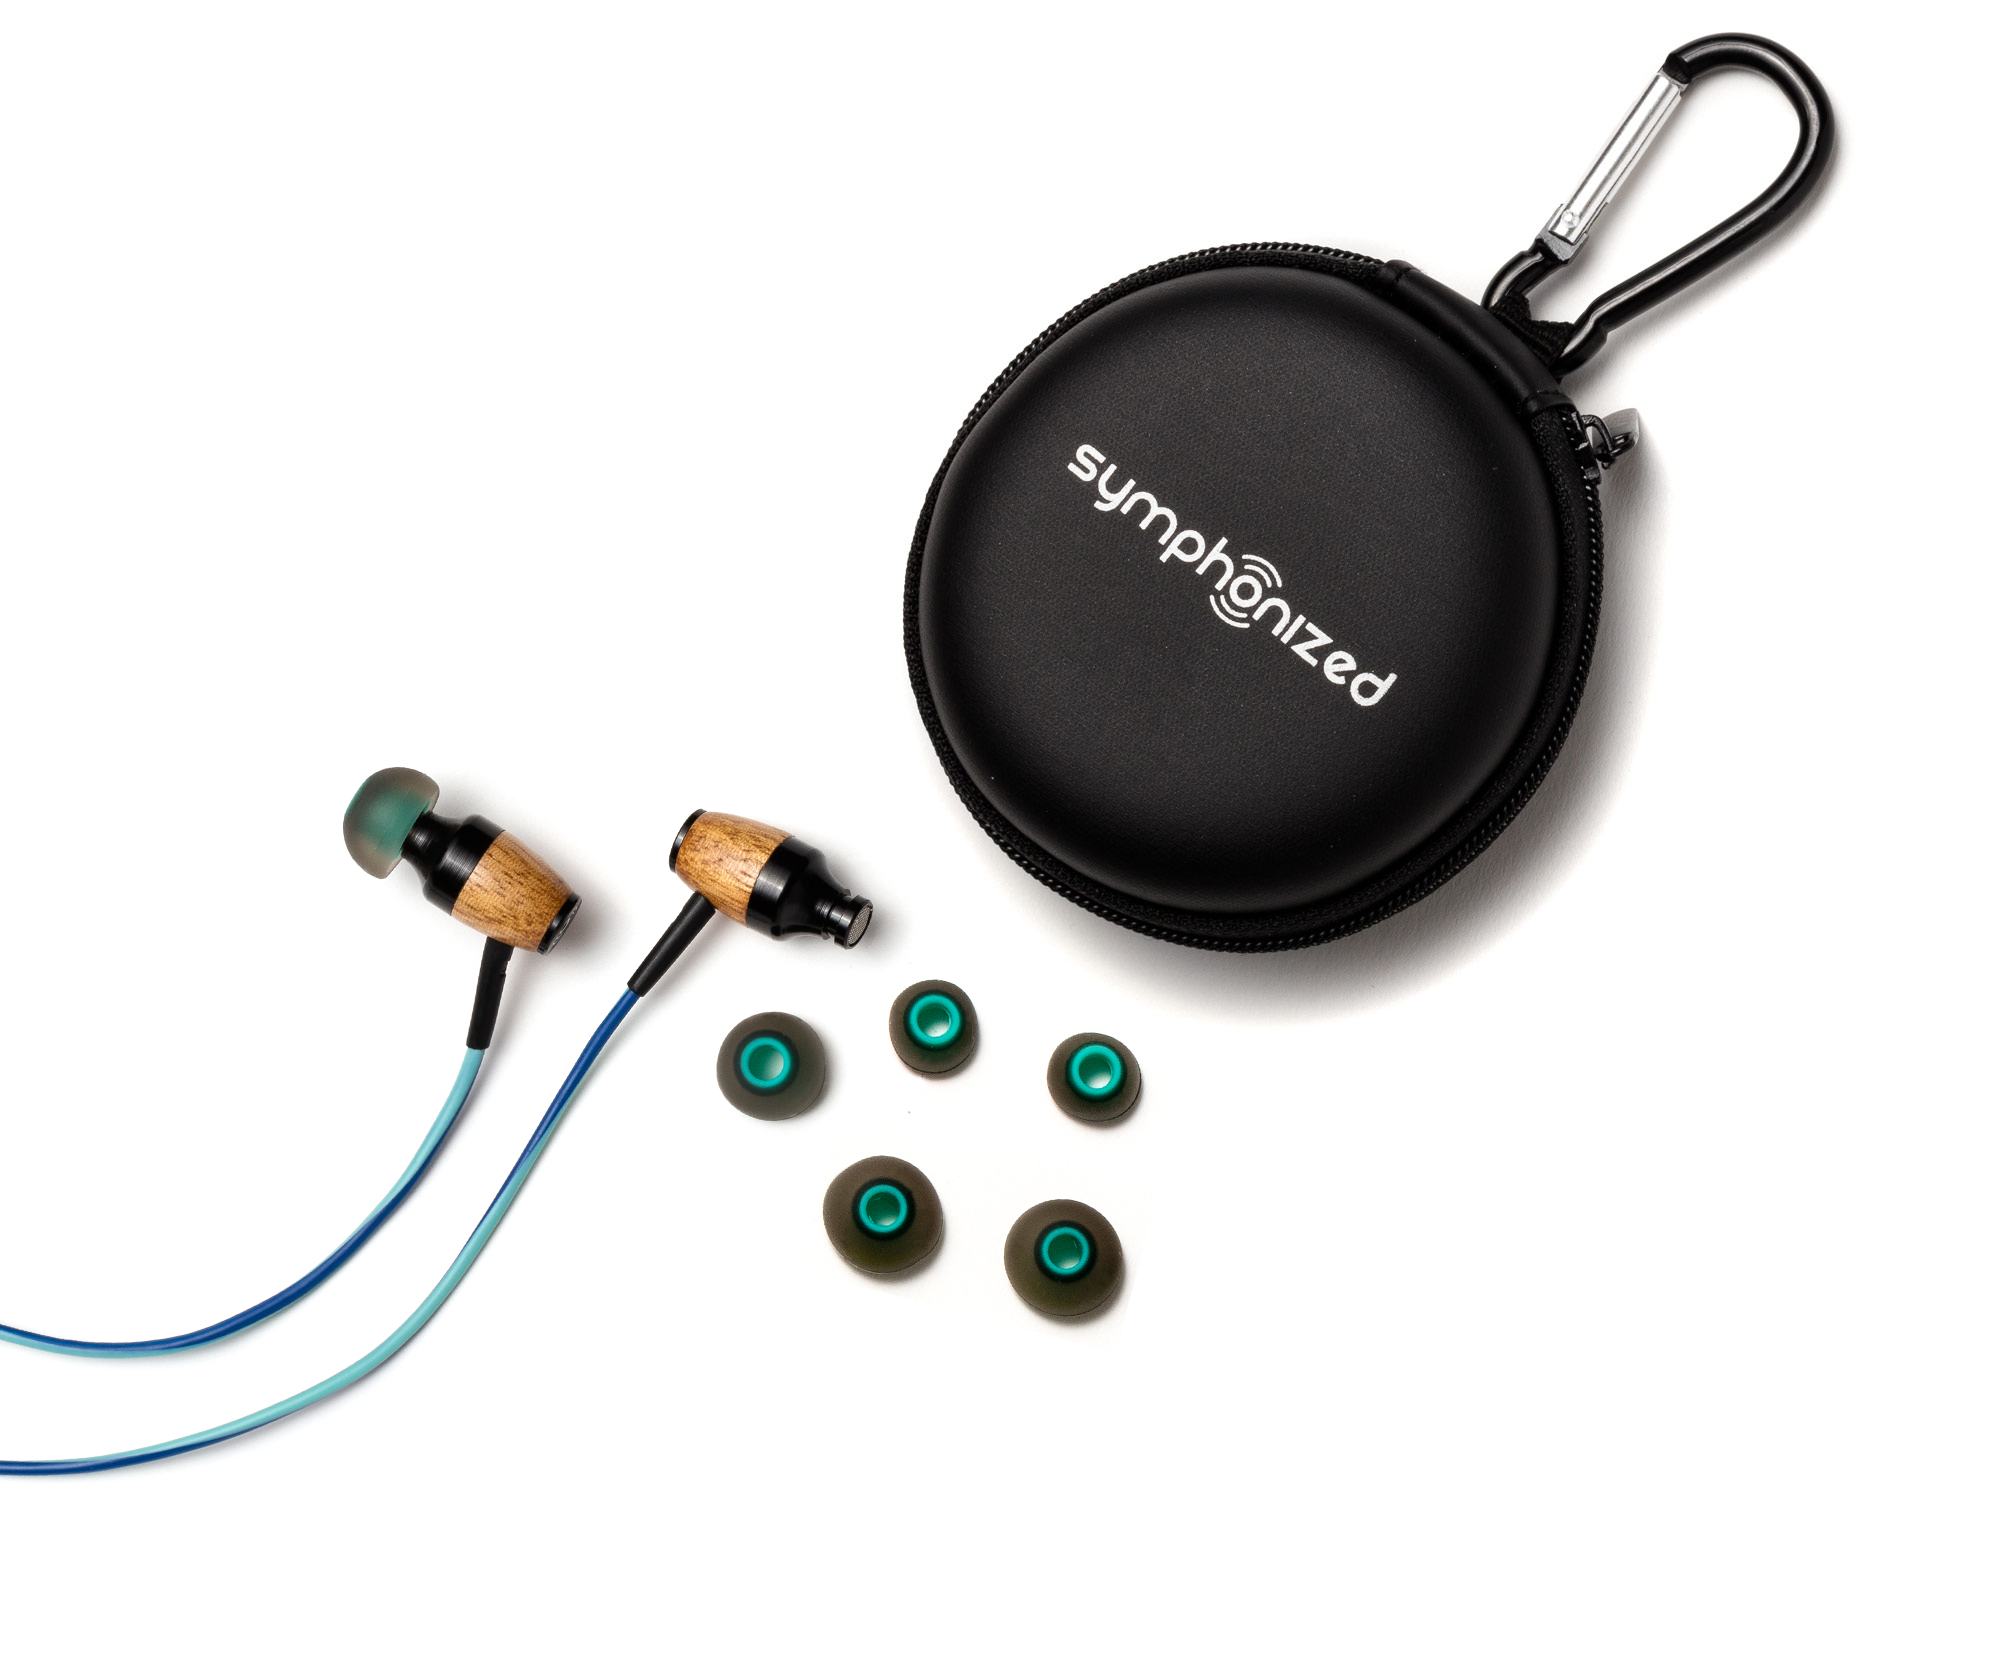 DRM In-Ear Wood Headphones - Teal and Blue